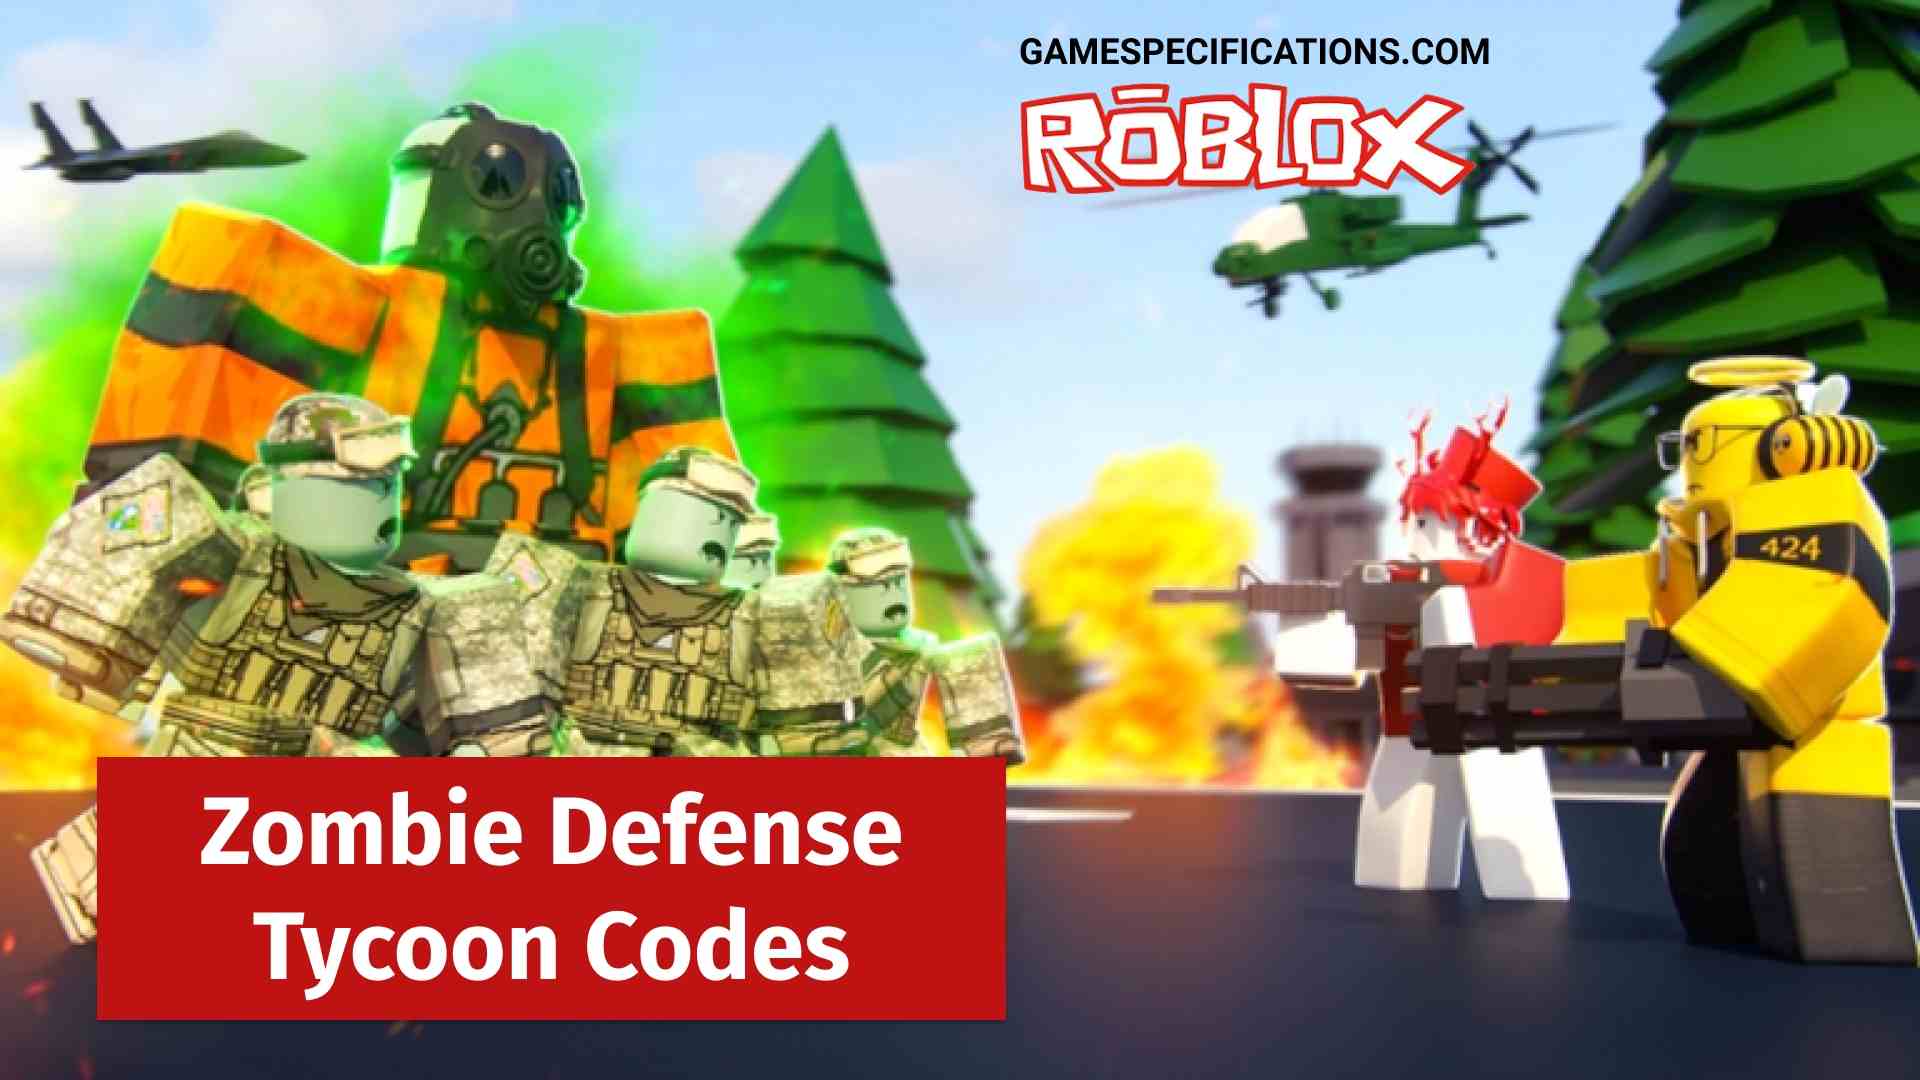 Roblox Zombie Defense Tycoon Codes July 2021 Game Specifications - roblox zombie survival games